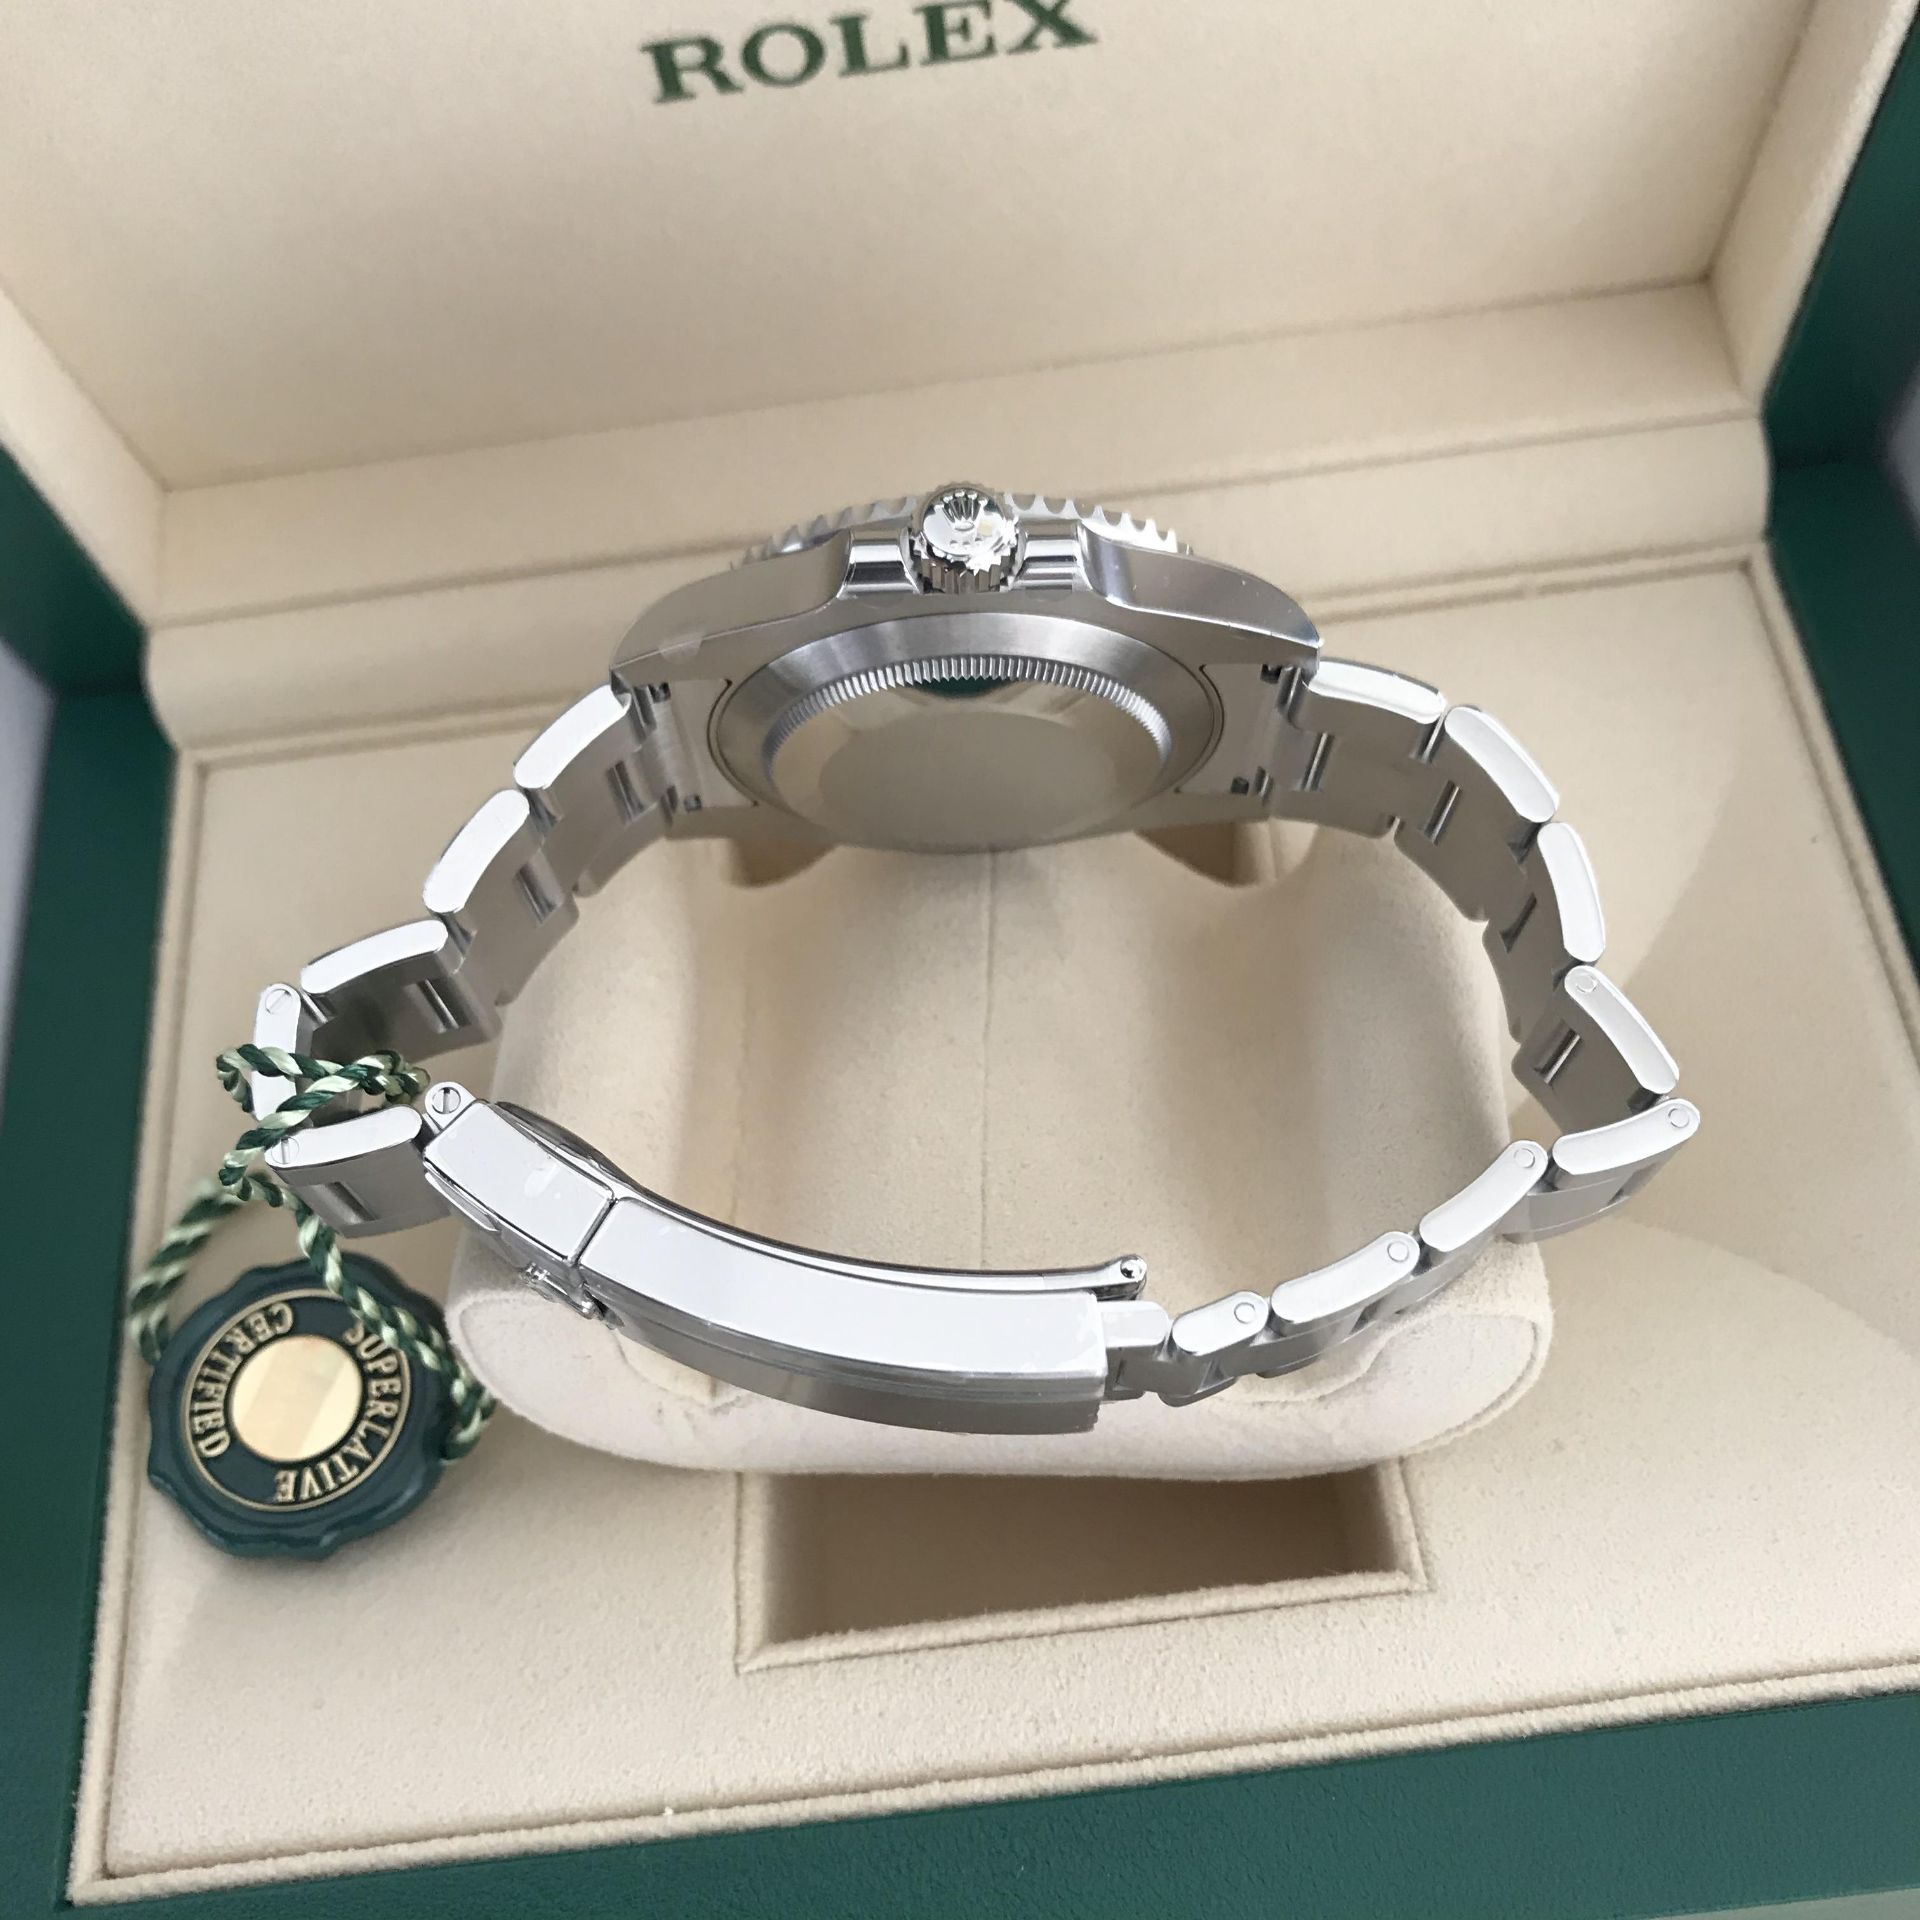 2020 ROLEX SUBMARINER OYSTER STEEL 40 MM WATCH 114060 - Image 9 of 15